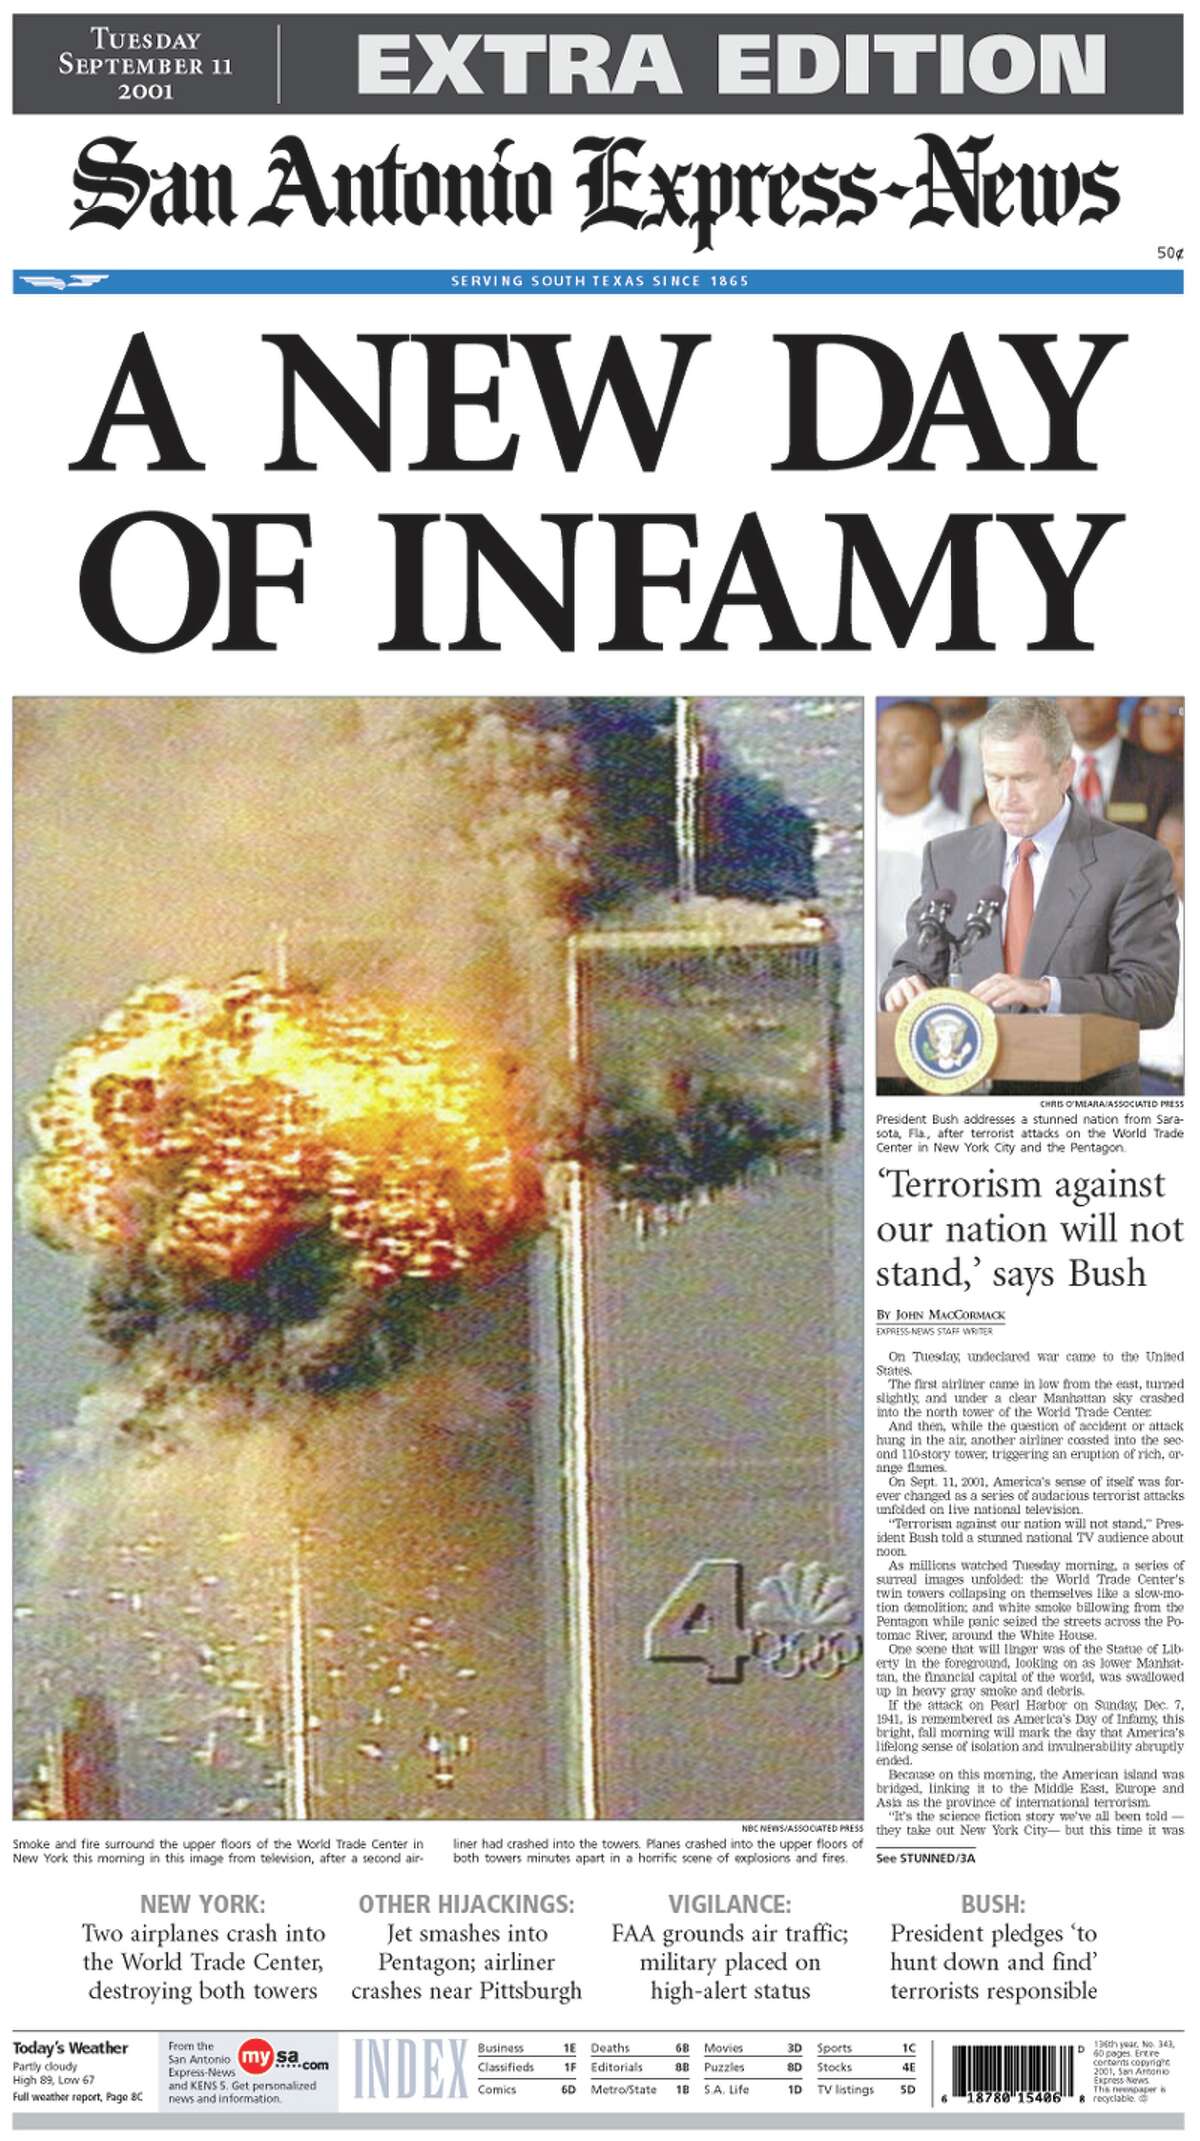 Orlando Sentinel Sep 12 2001 Today Our Nation Saw Evil 9//11 Day of  Terror